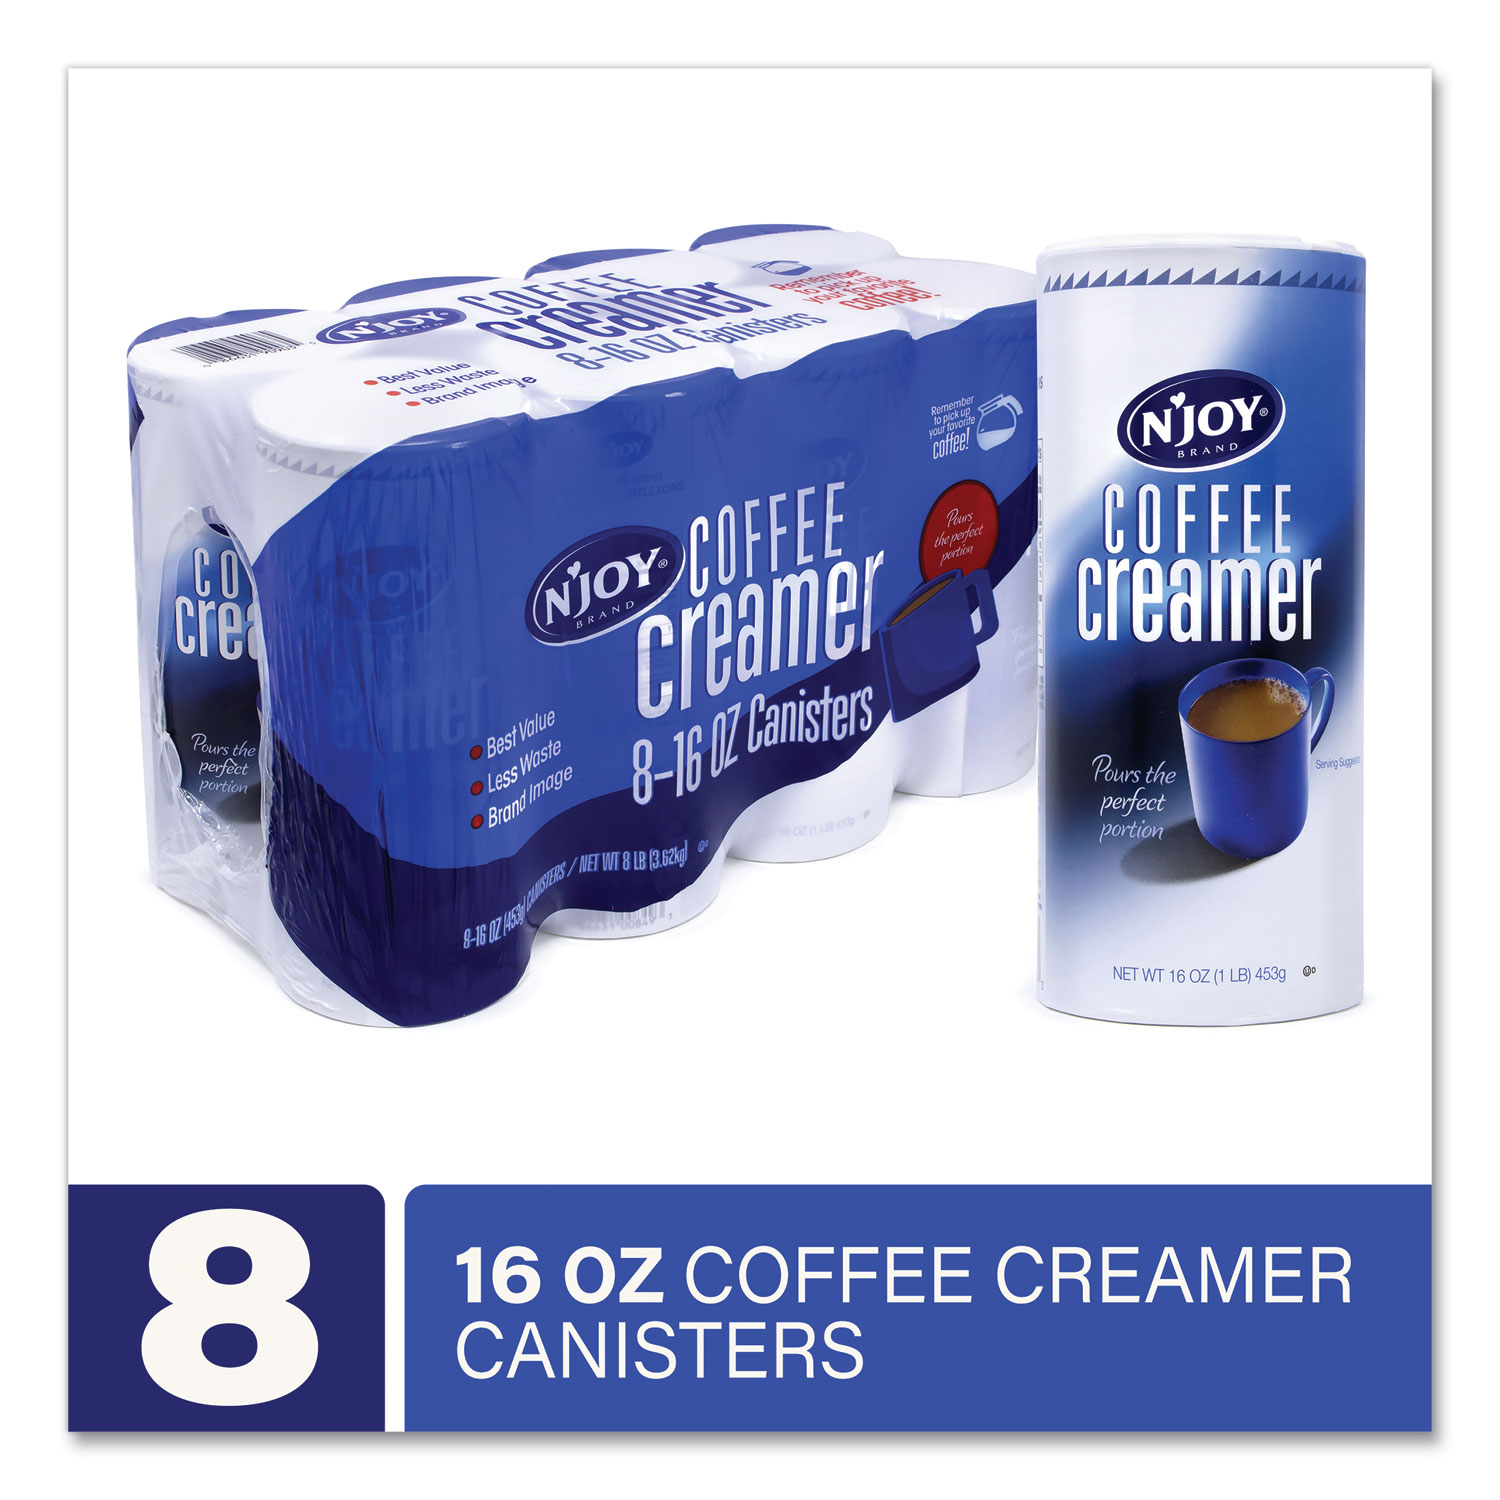  N'Joy 47011 Non-Dairy Coffee Creamer, 16 oz Canister, 8/Carton, Free Delivery in 1-4 Business Days (GRR22001134) 